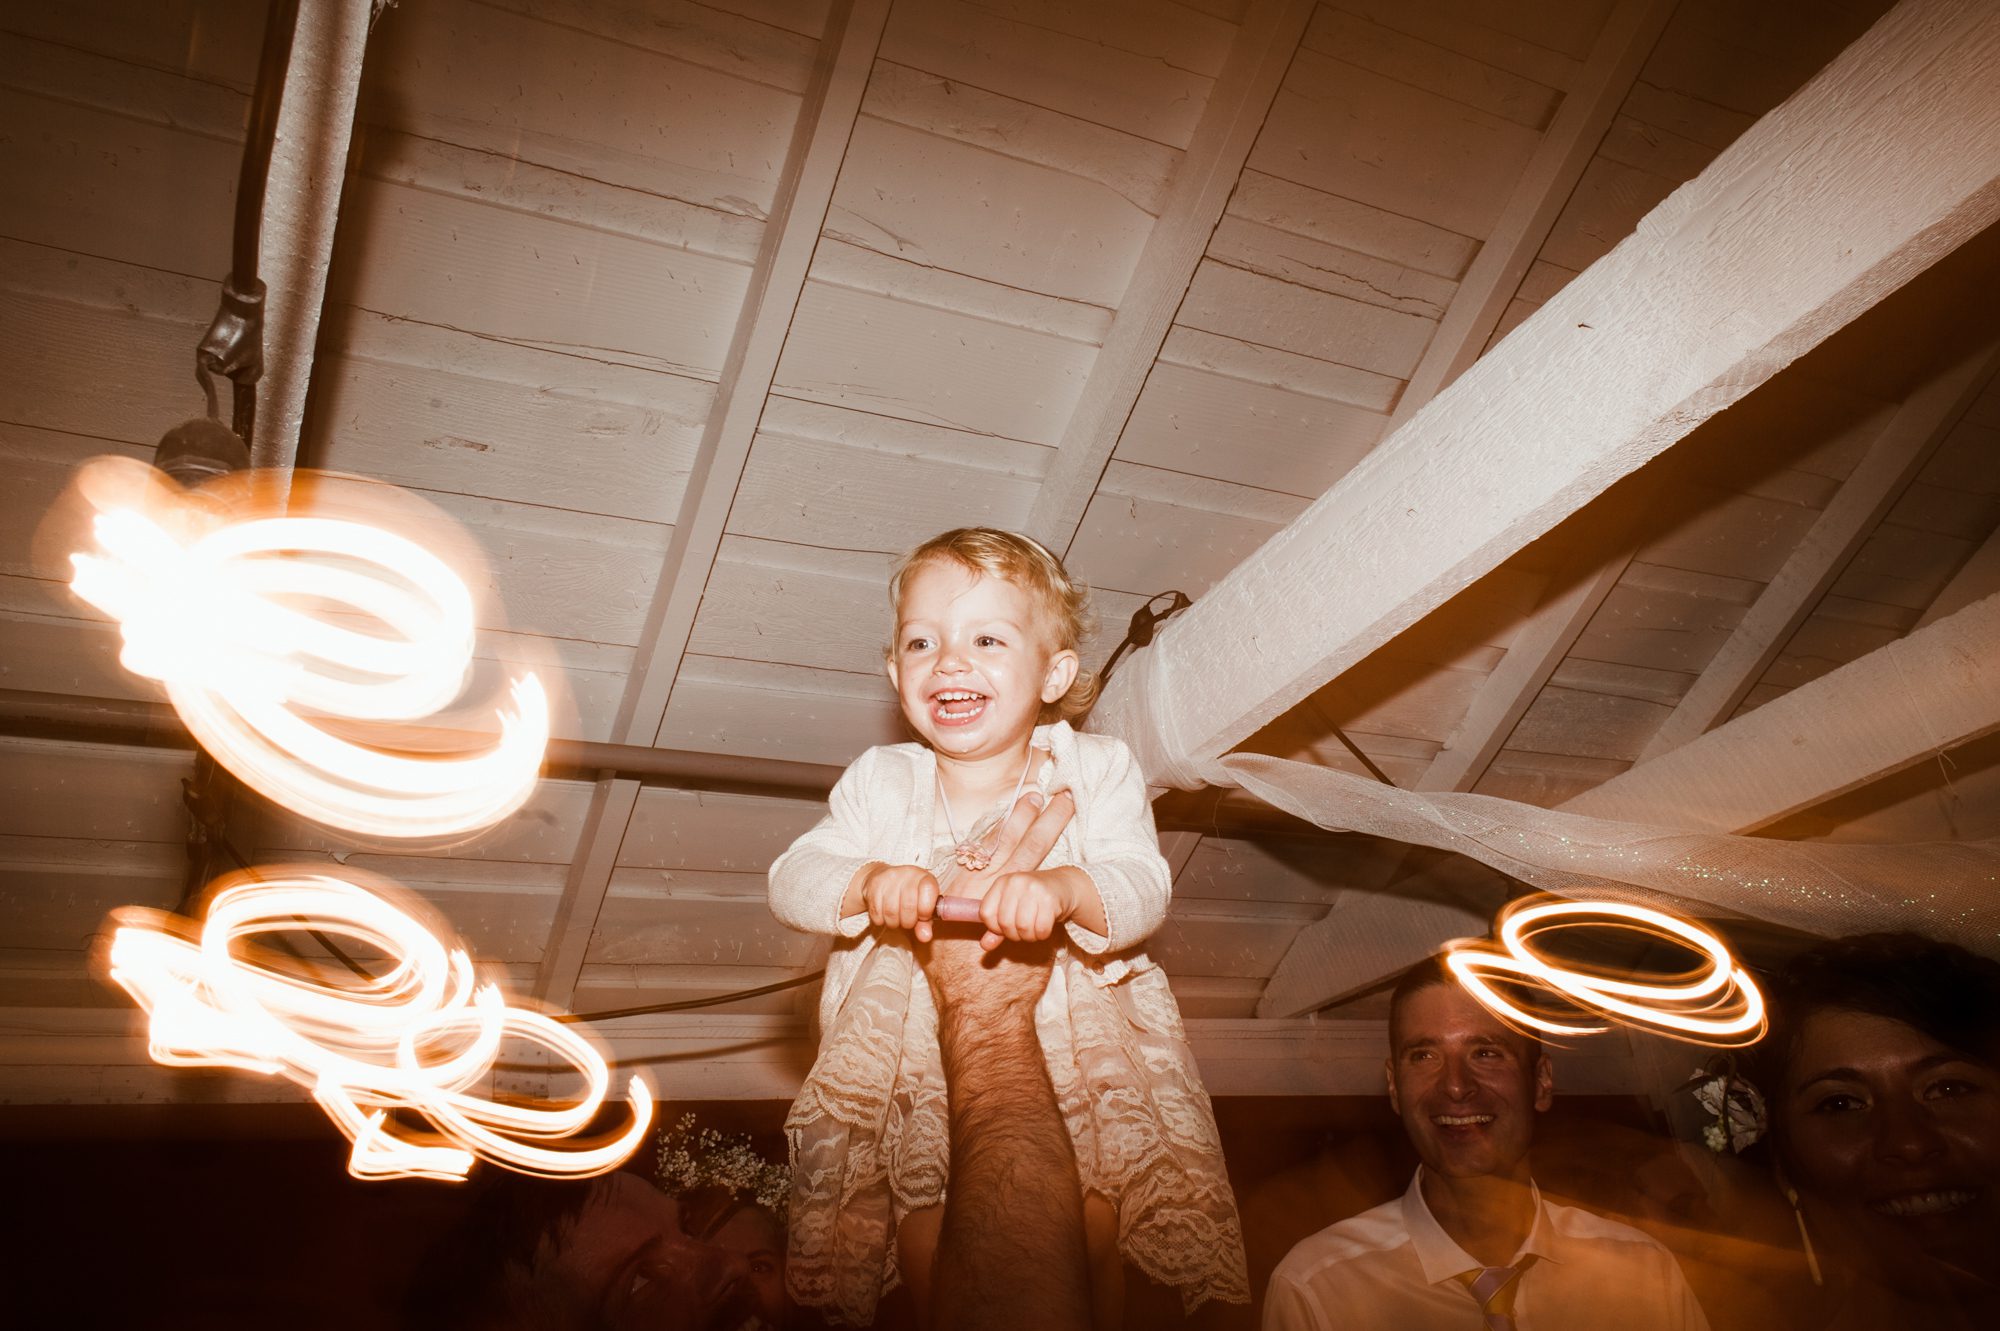 Baby dances at a wedding. By Sou'Wester wedding photographer Briana Morrison